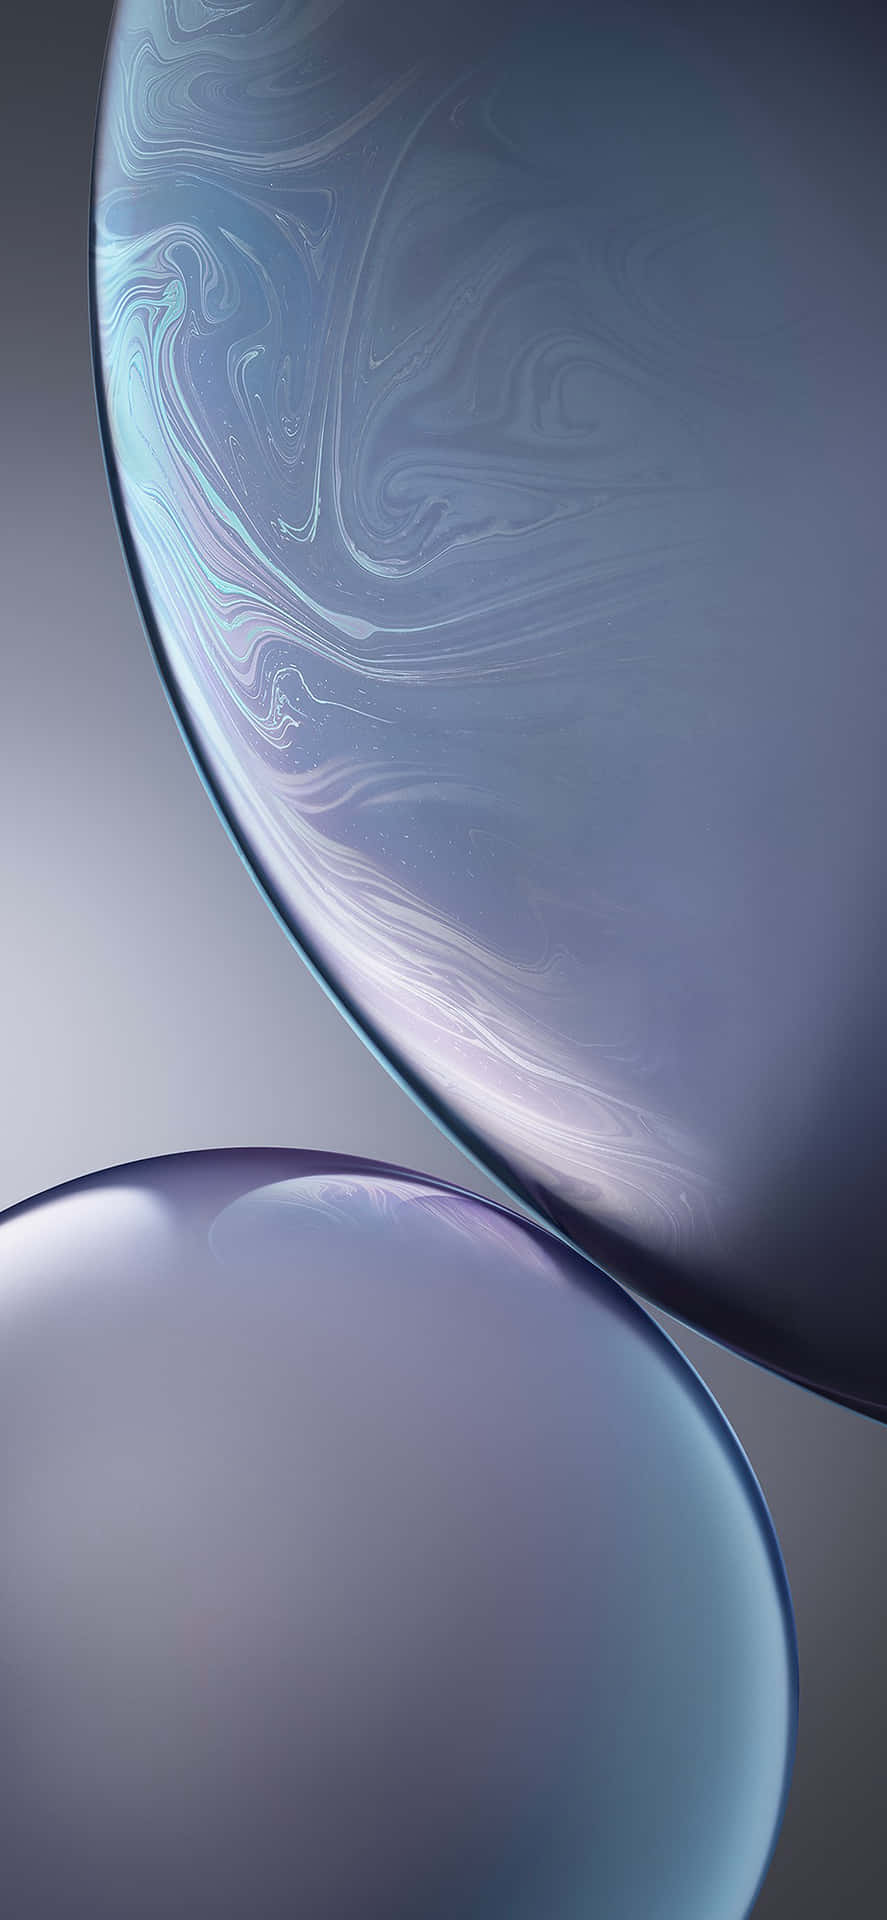 Explore The Universe With The Iphone Xr Wallpaper